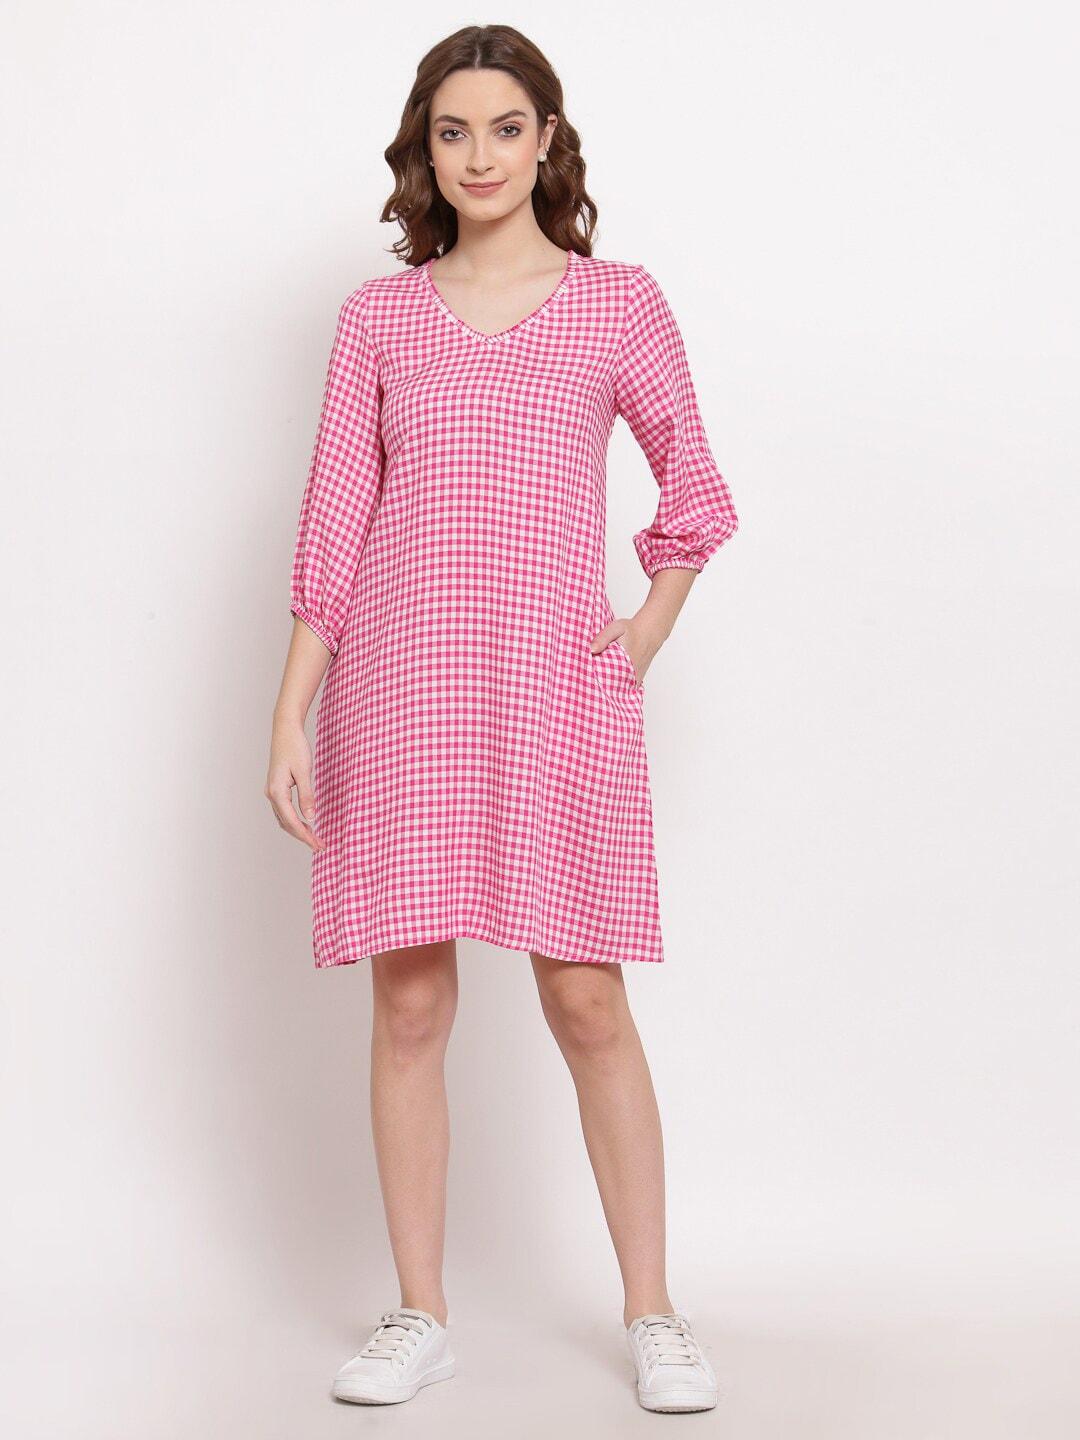 terquois-pink-checked-a-line-dress